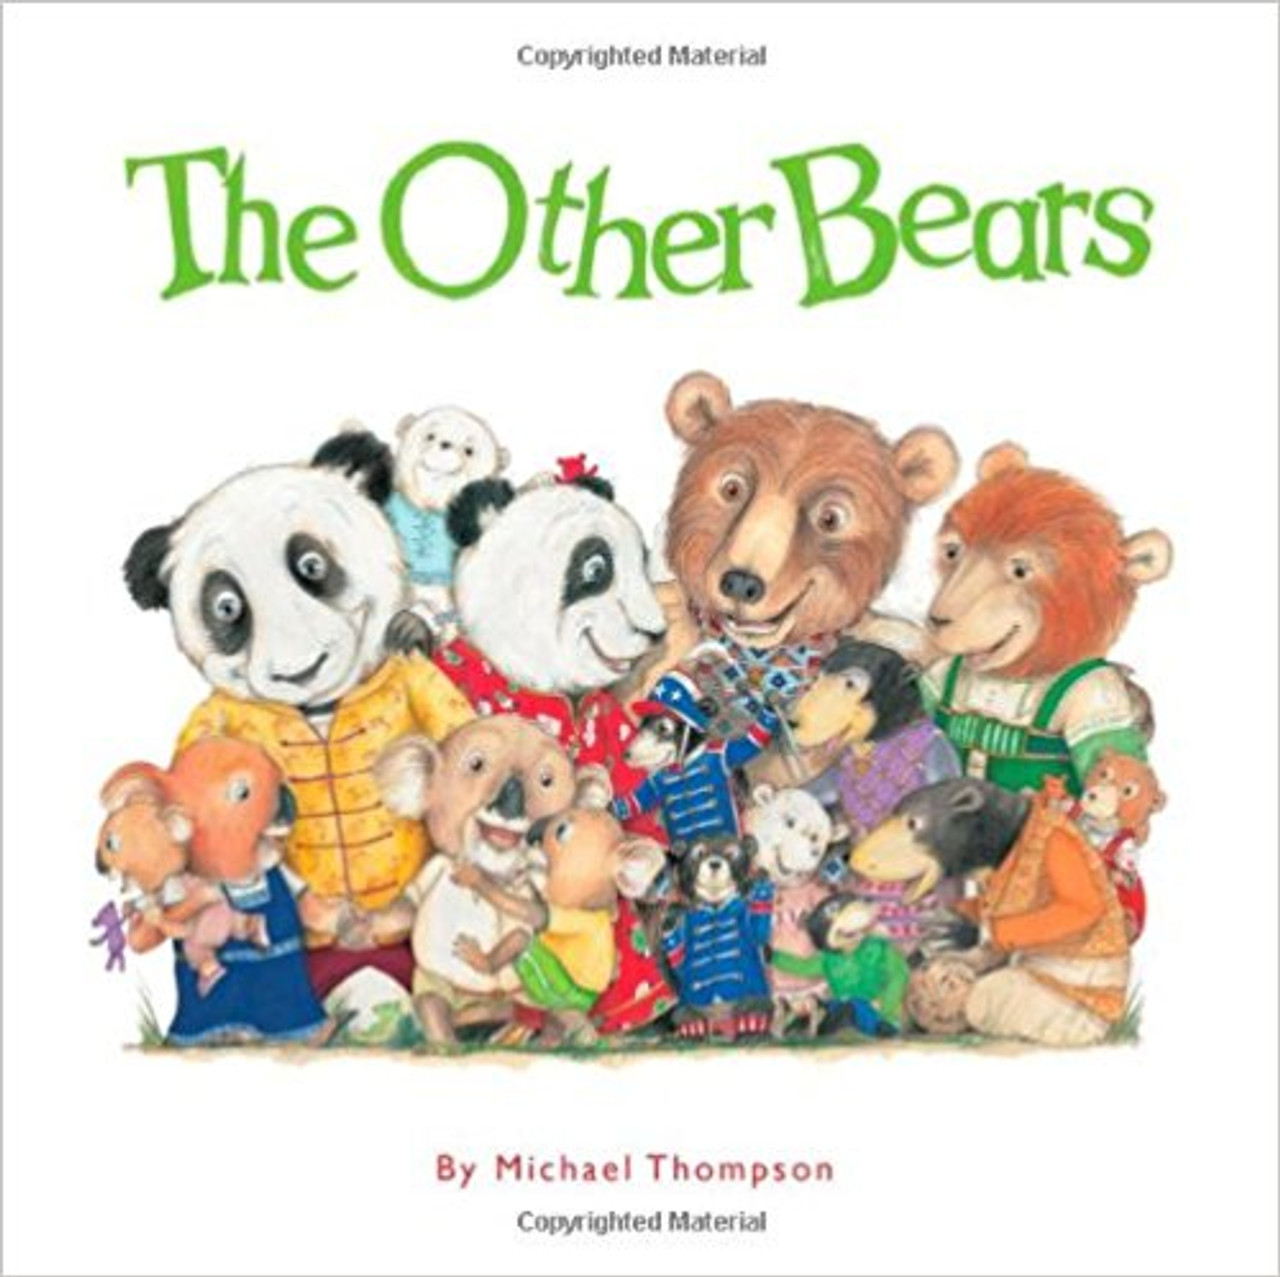 The Other Bears (Arabic) by Michael Thompson